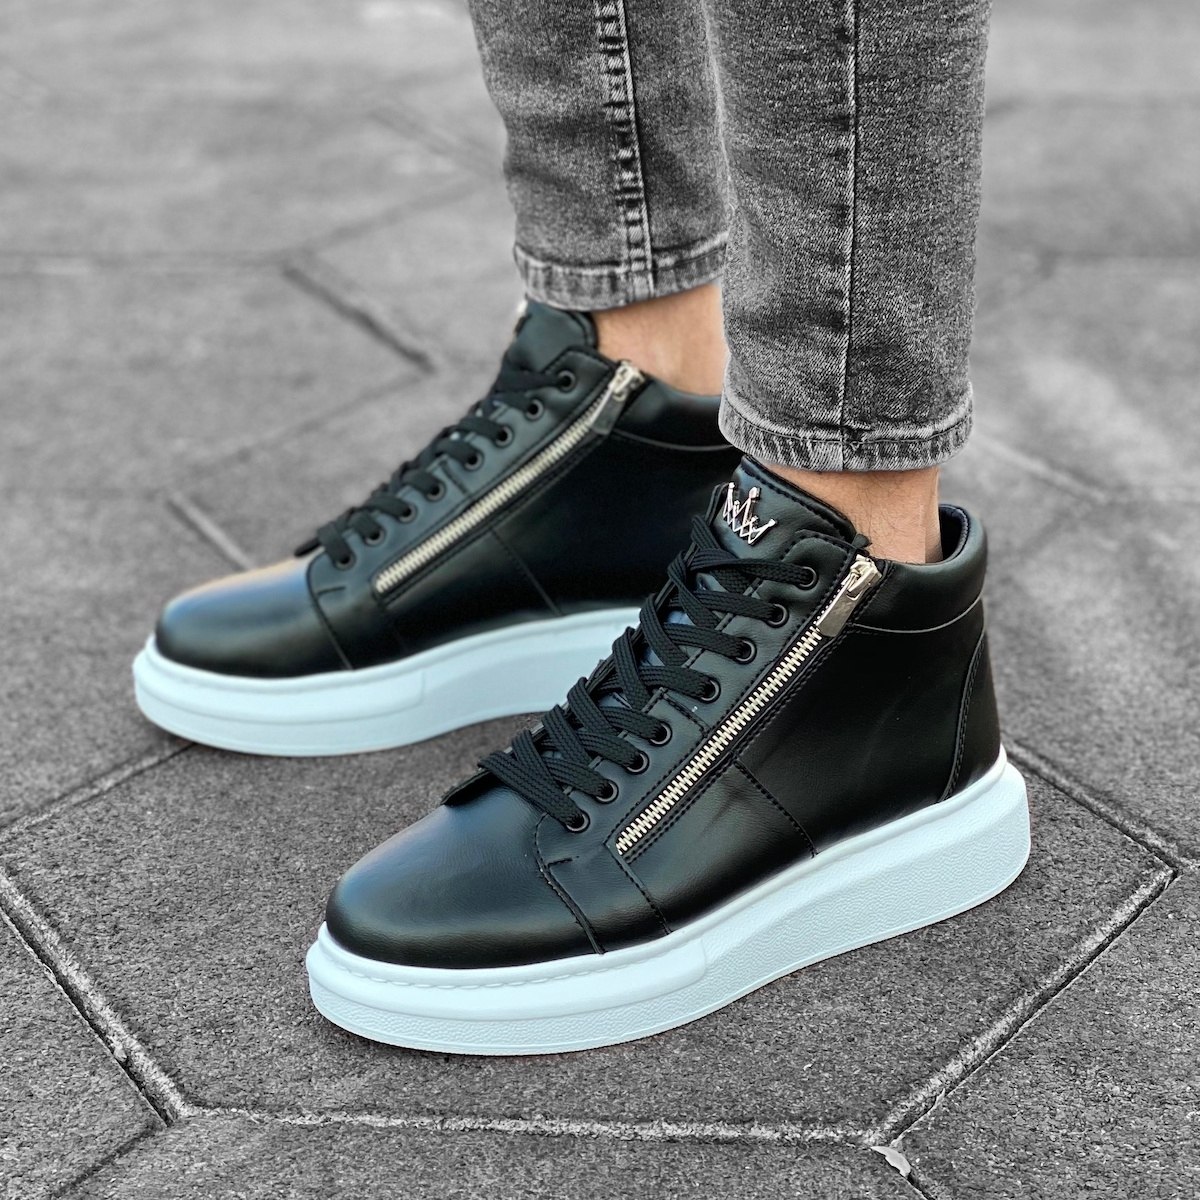 Hype Sole Zipped Style High Top Sneakers in Black | Martin Valen